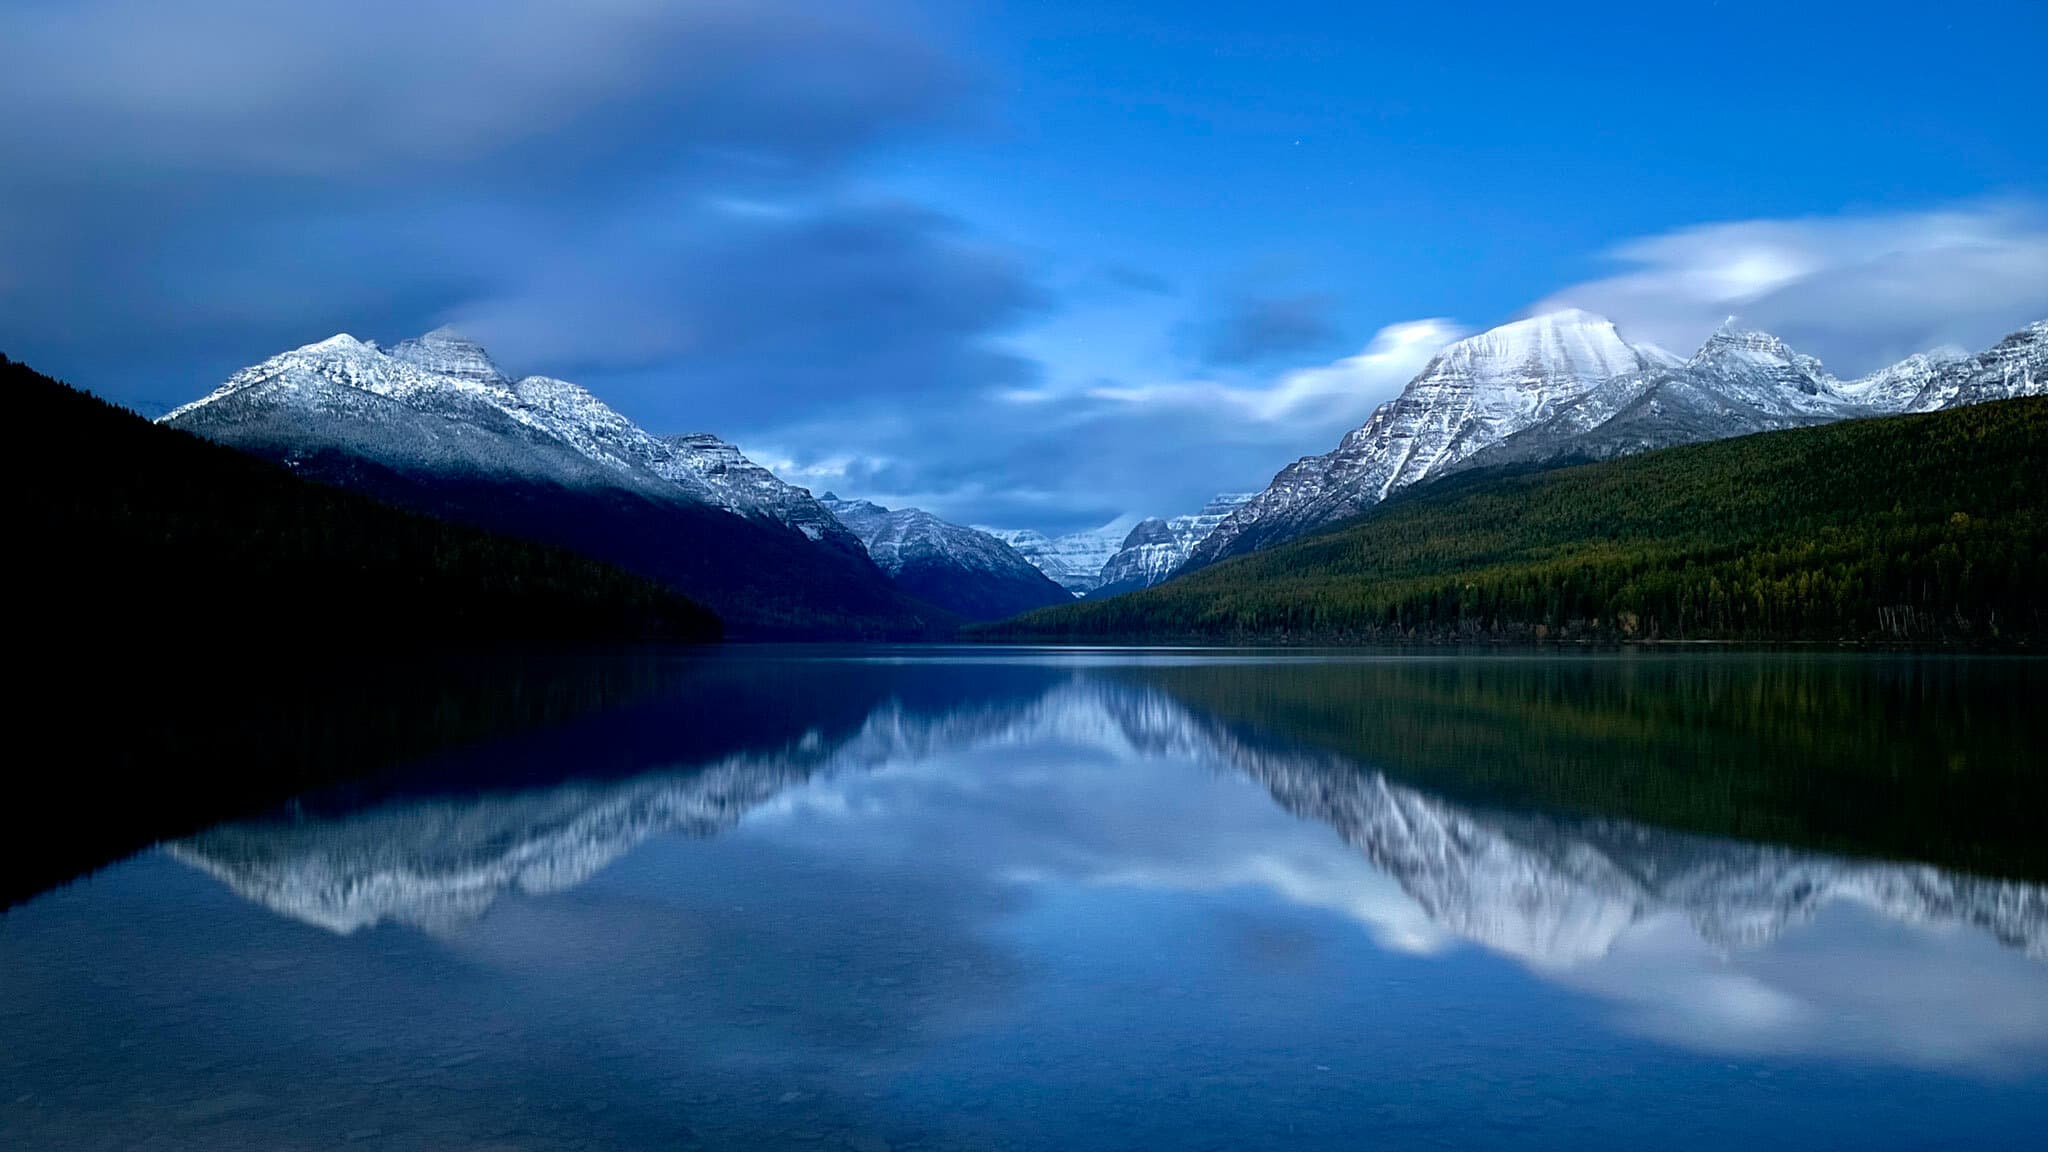 Photographer Austin Mann tests the iPhone 12 Pro camera at Glacier National Park with impressive results